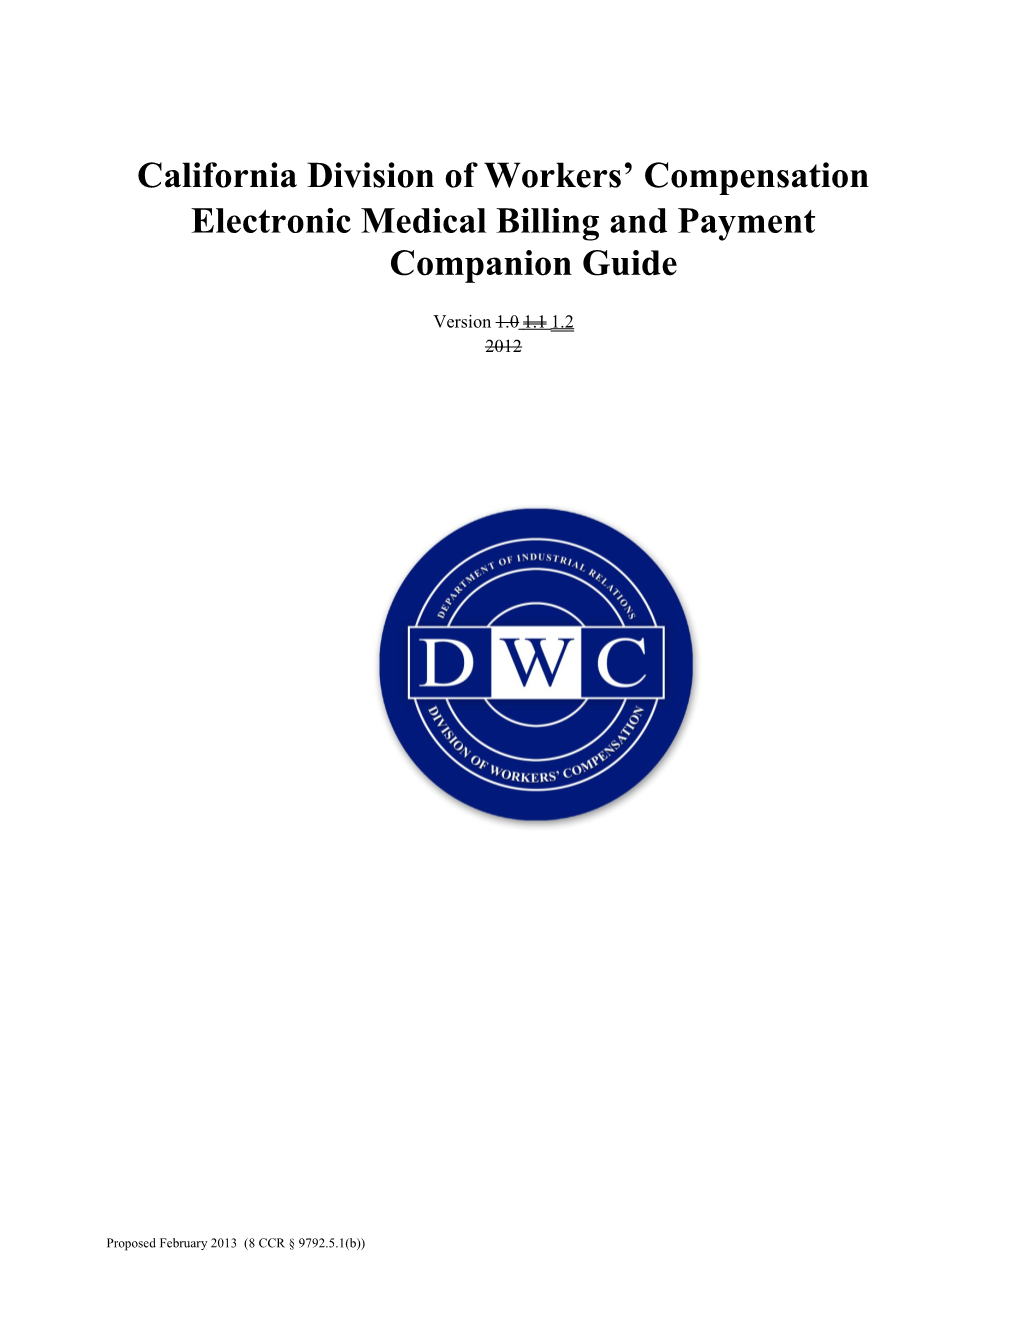 California Electronic Medical Billing and Payment Companion Guide